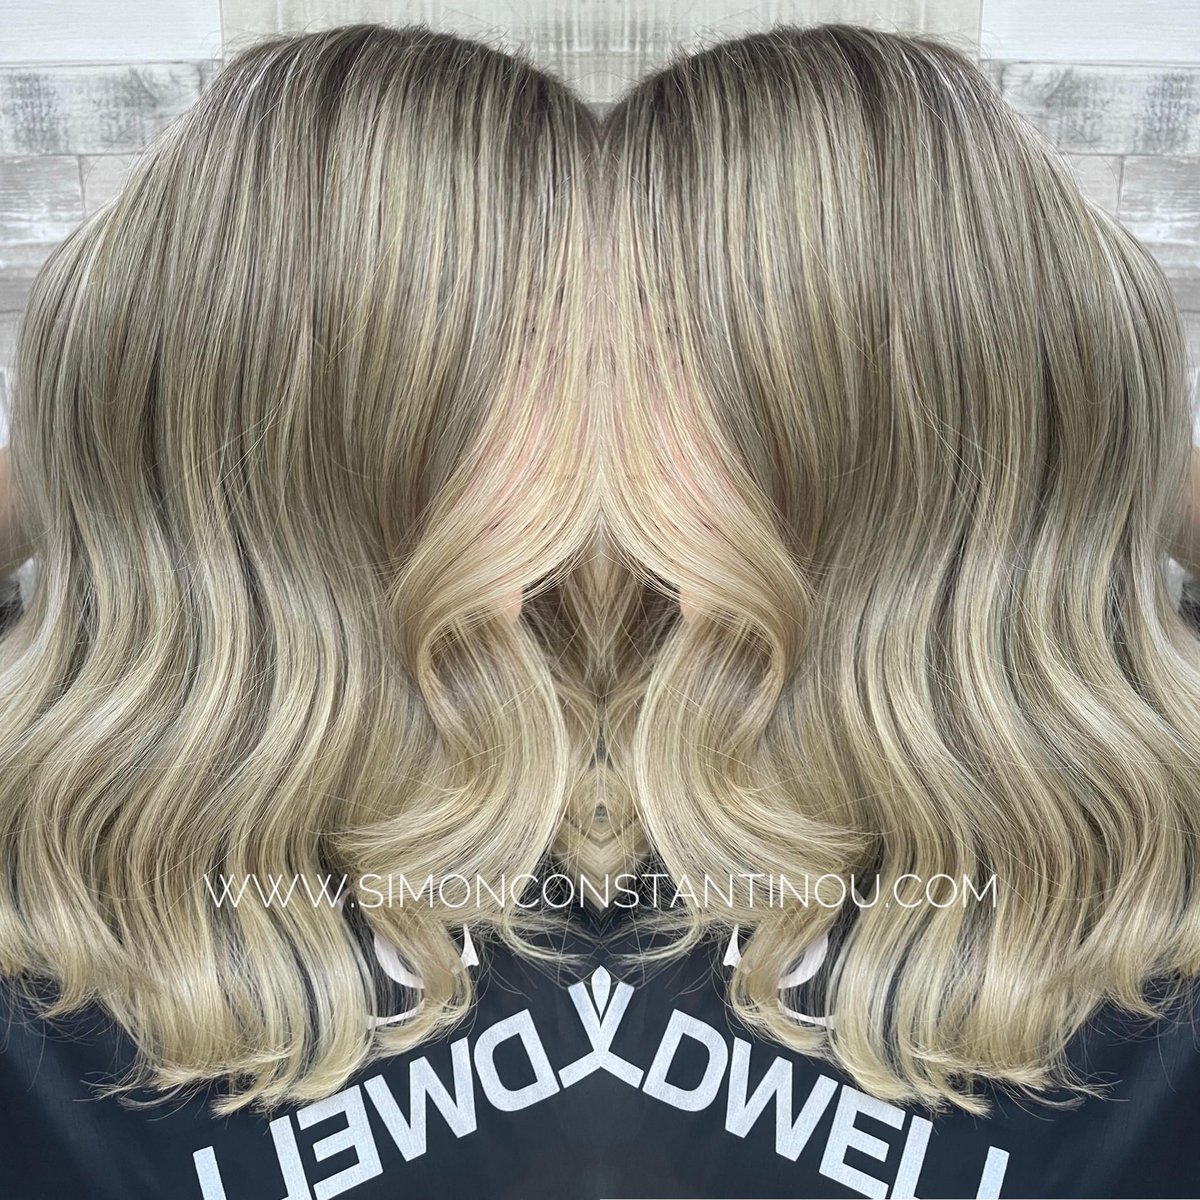 #Babylights & blended! #Balayage by Leonie 💗
 
Book your colour consultation with Leonie ☎ 02920461191 or book online.
 
#simonconstantinou #hairdresserscardiff  #Cardiffhairsalon #balayagecardiff #balayageinspo #blondebalayage #cardiffbalayage @GoldwellUK